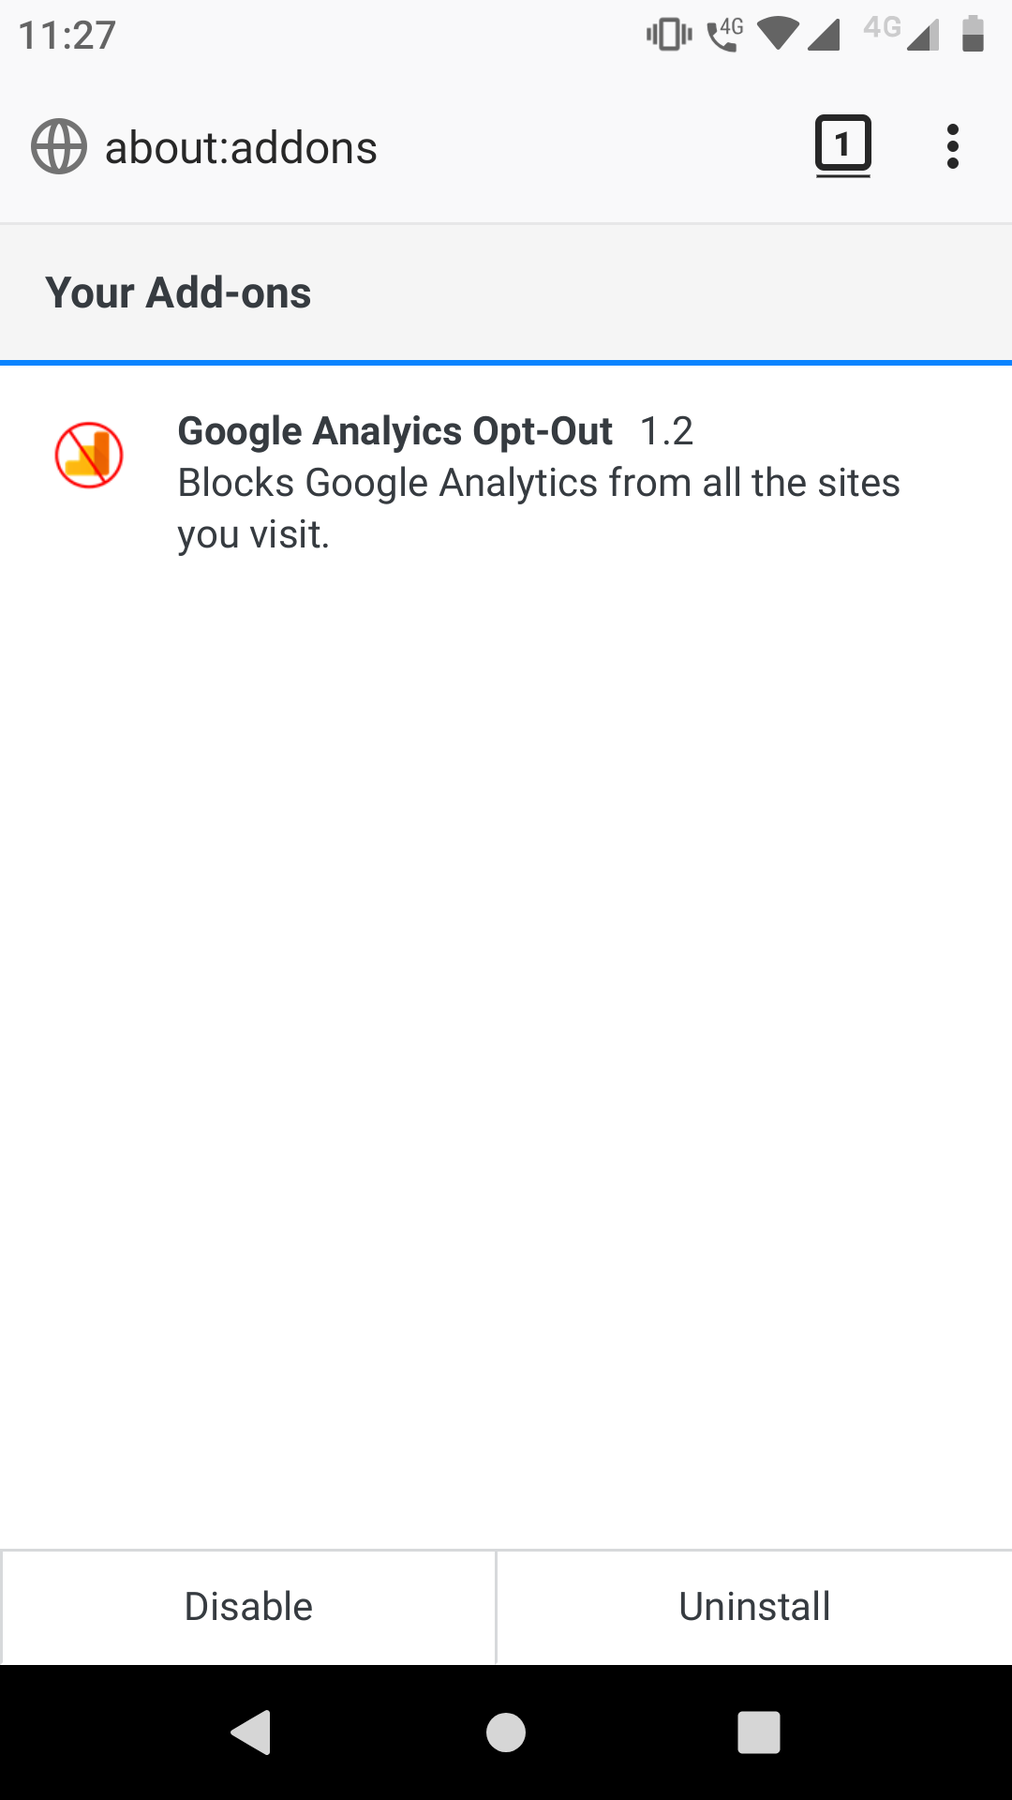 Google Analytics Opt-Out